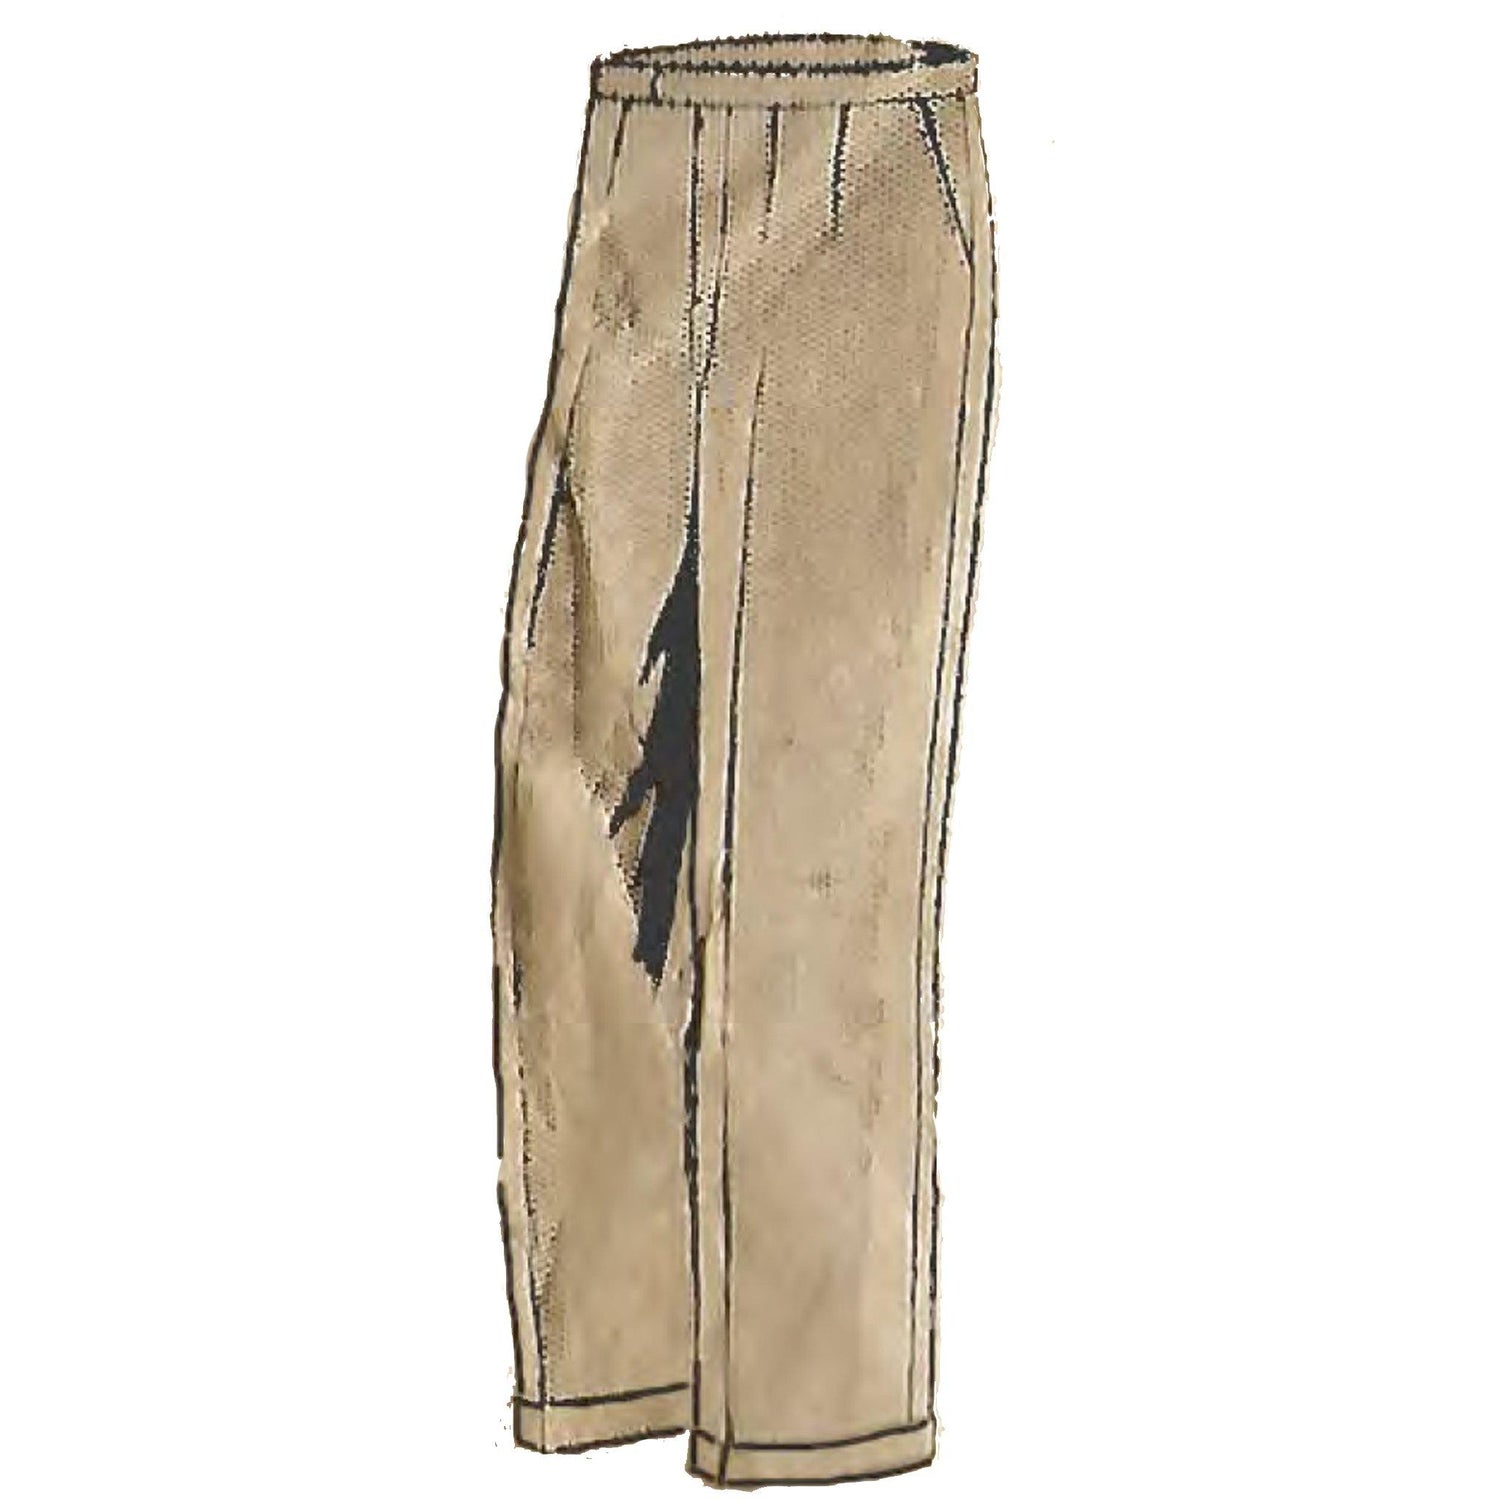 New Mens Trousers, 1940s Style! – Revival Retro